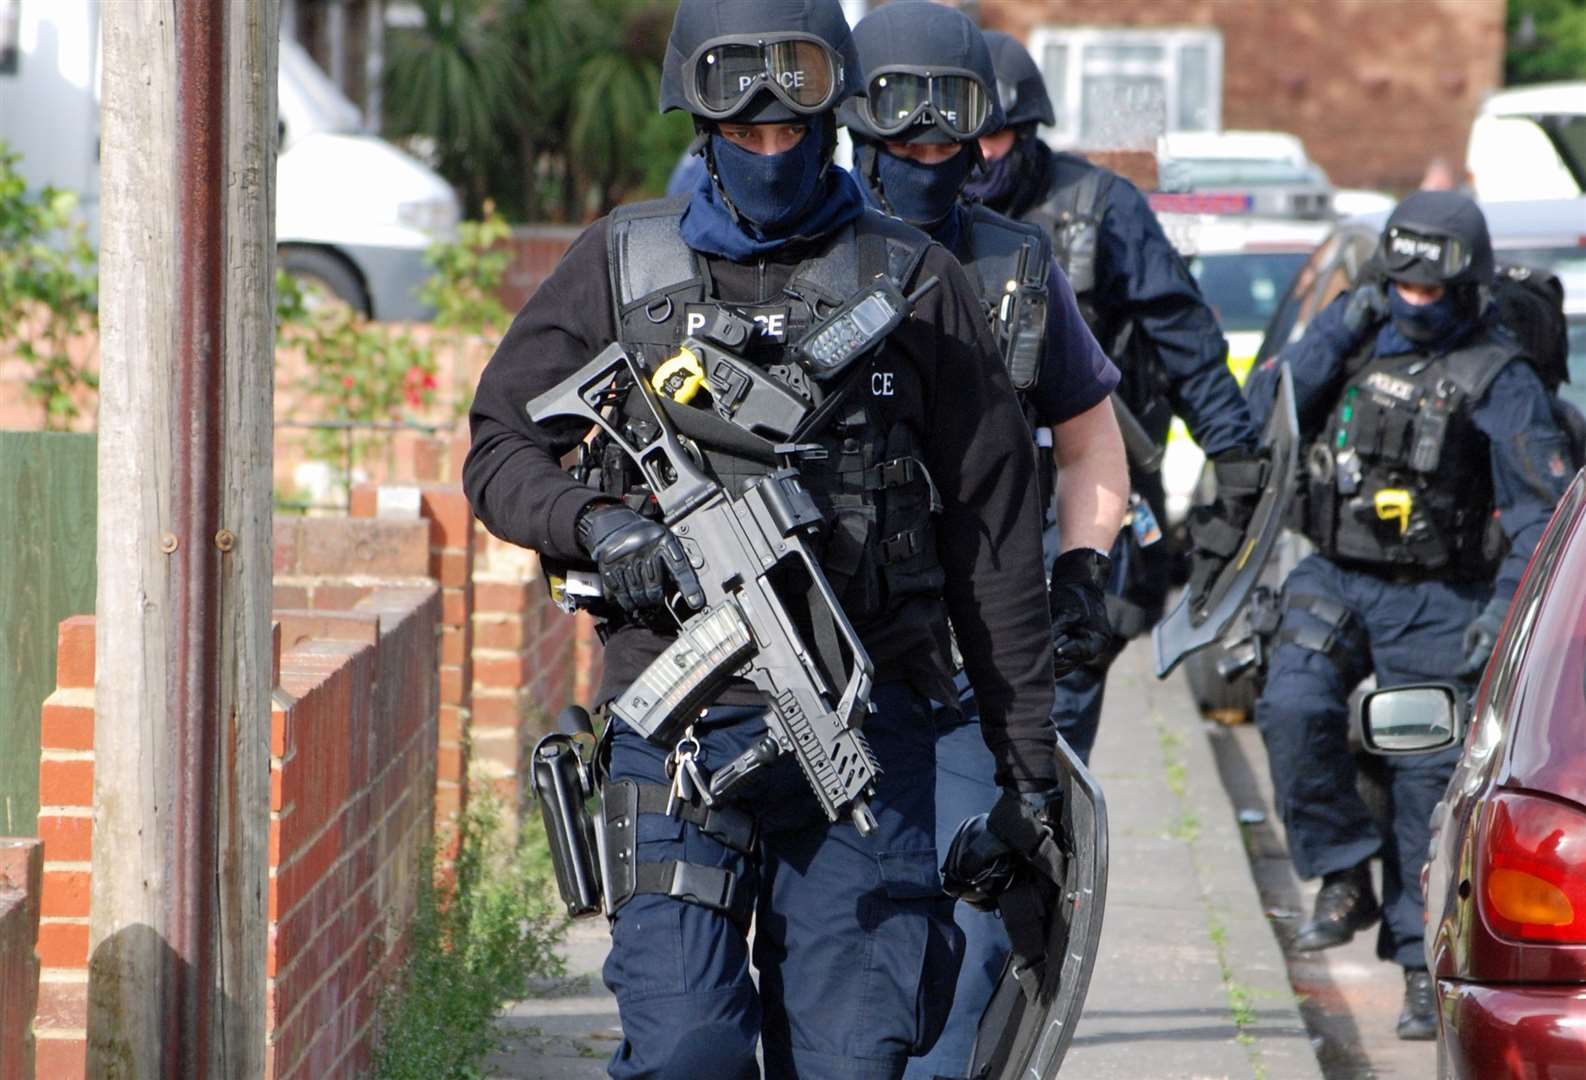 Armed police were called as a "precaution"